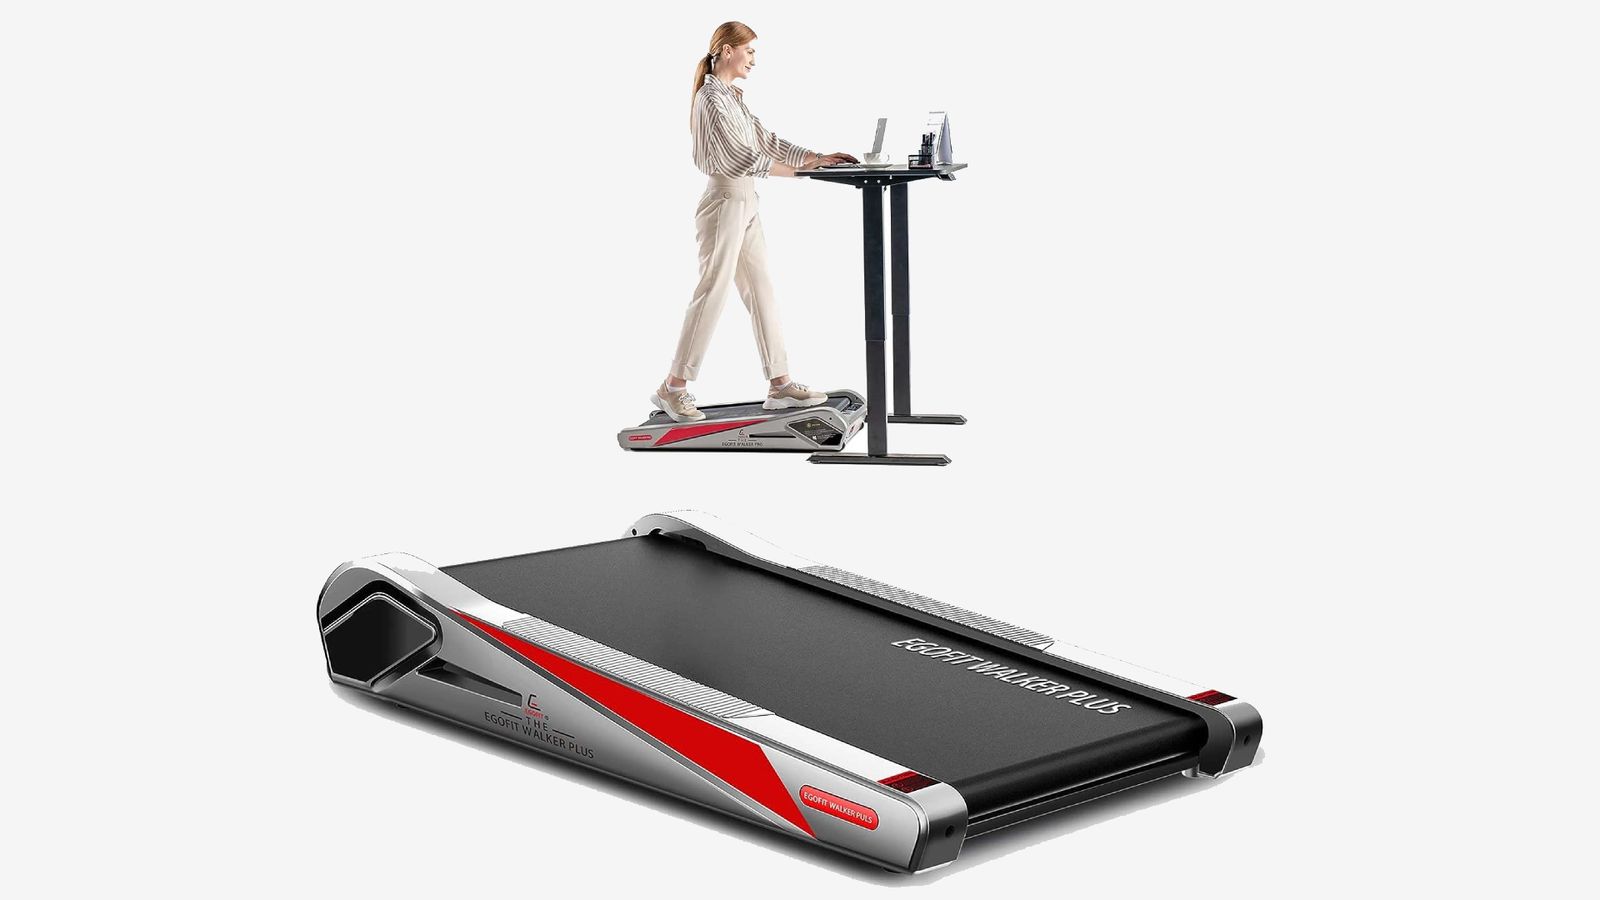 Egofit Pro M1 product image of a silver, black, and red treadmill, while in the background someone wearing white using it with the stand up.